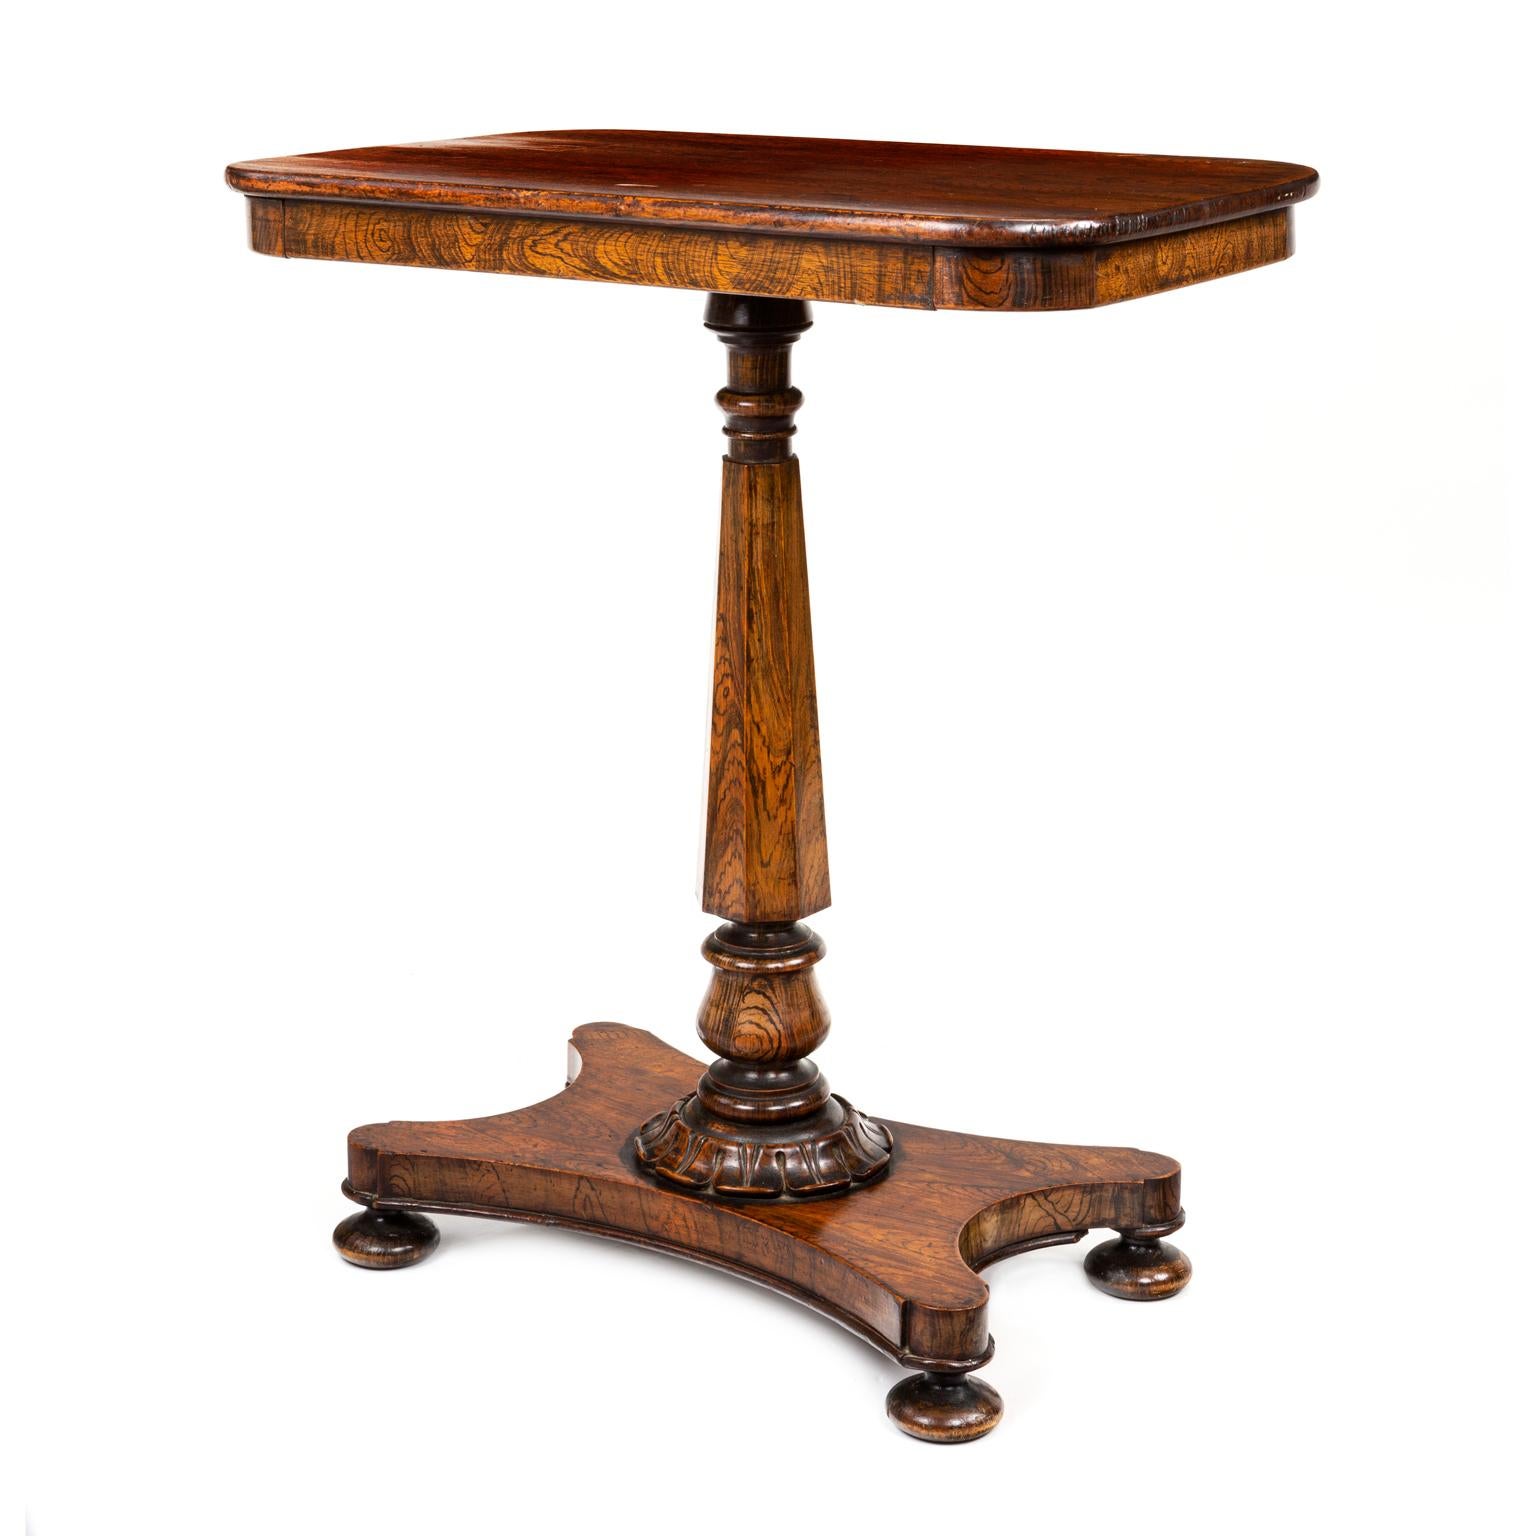 19th Century Small and Attractive Regency Pedestal Table Attributed to Gillows of Lancaster